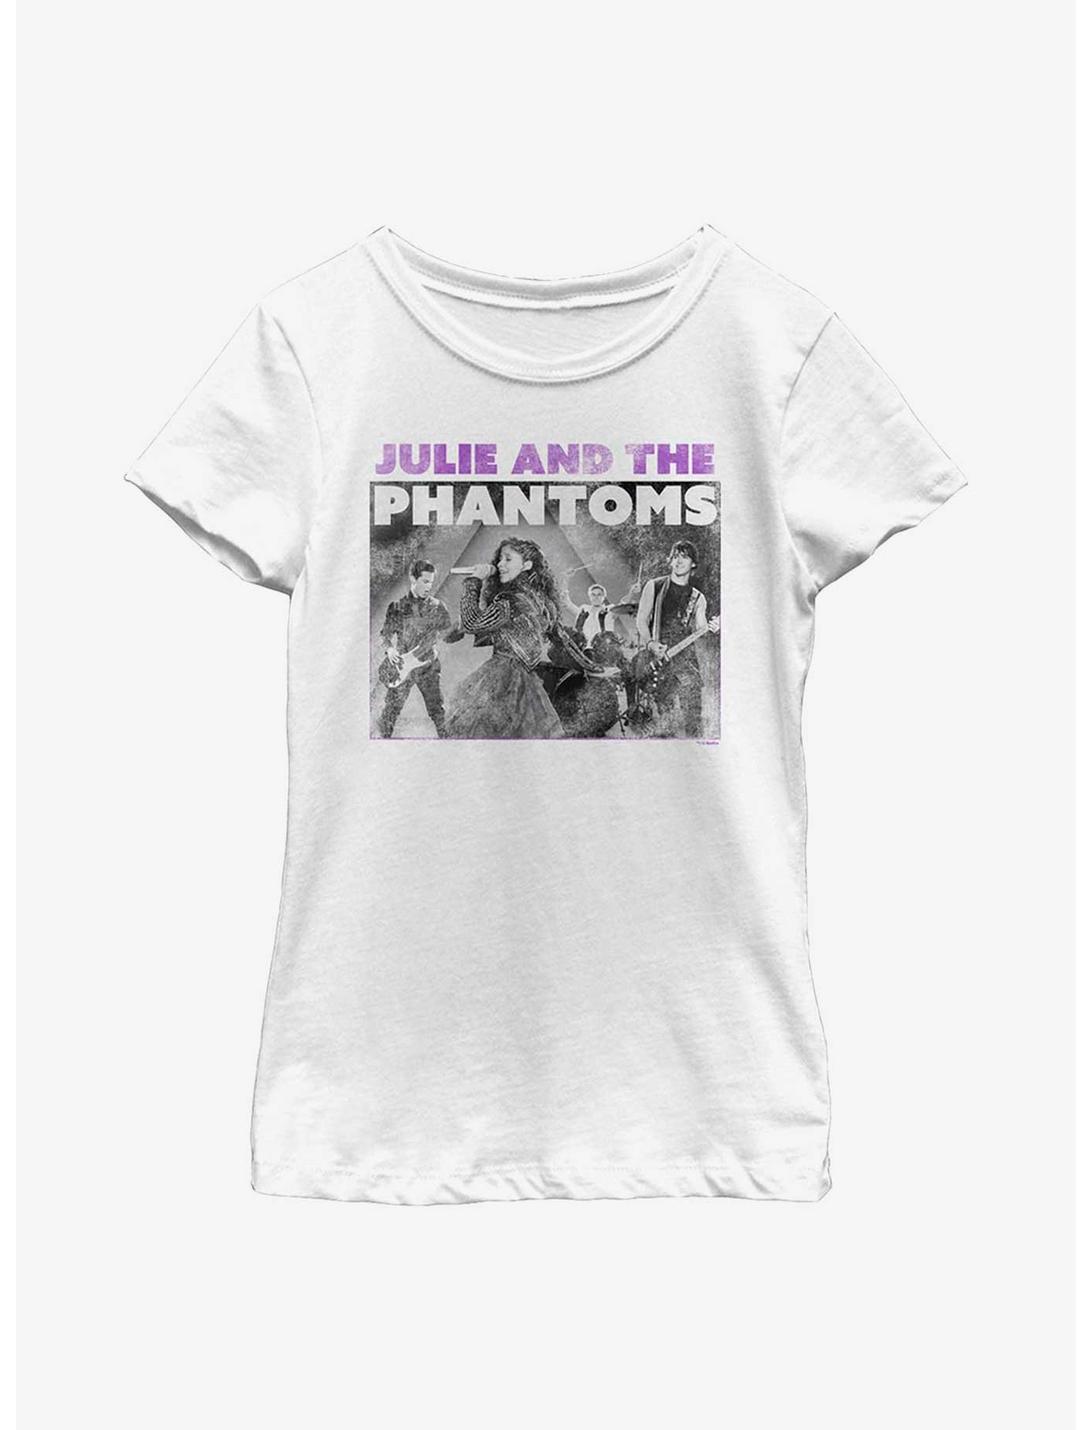 Julie And The Phantoms Gig Poster Youth Girls T-Shirt, WHITE, hi-res